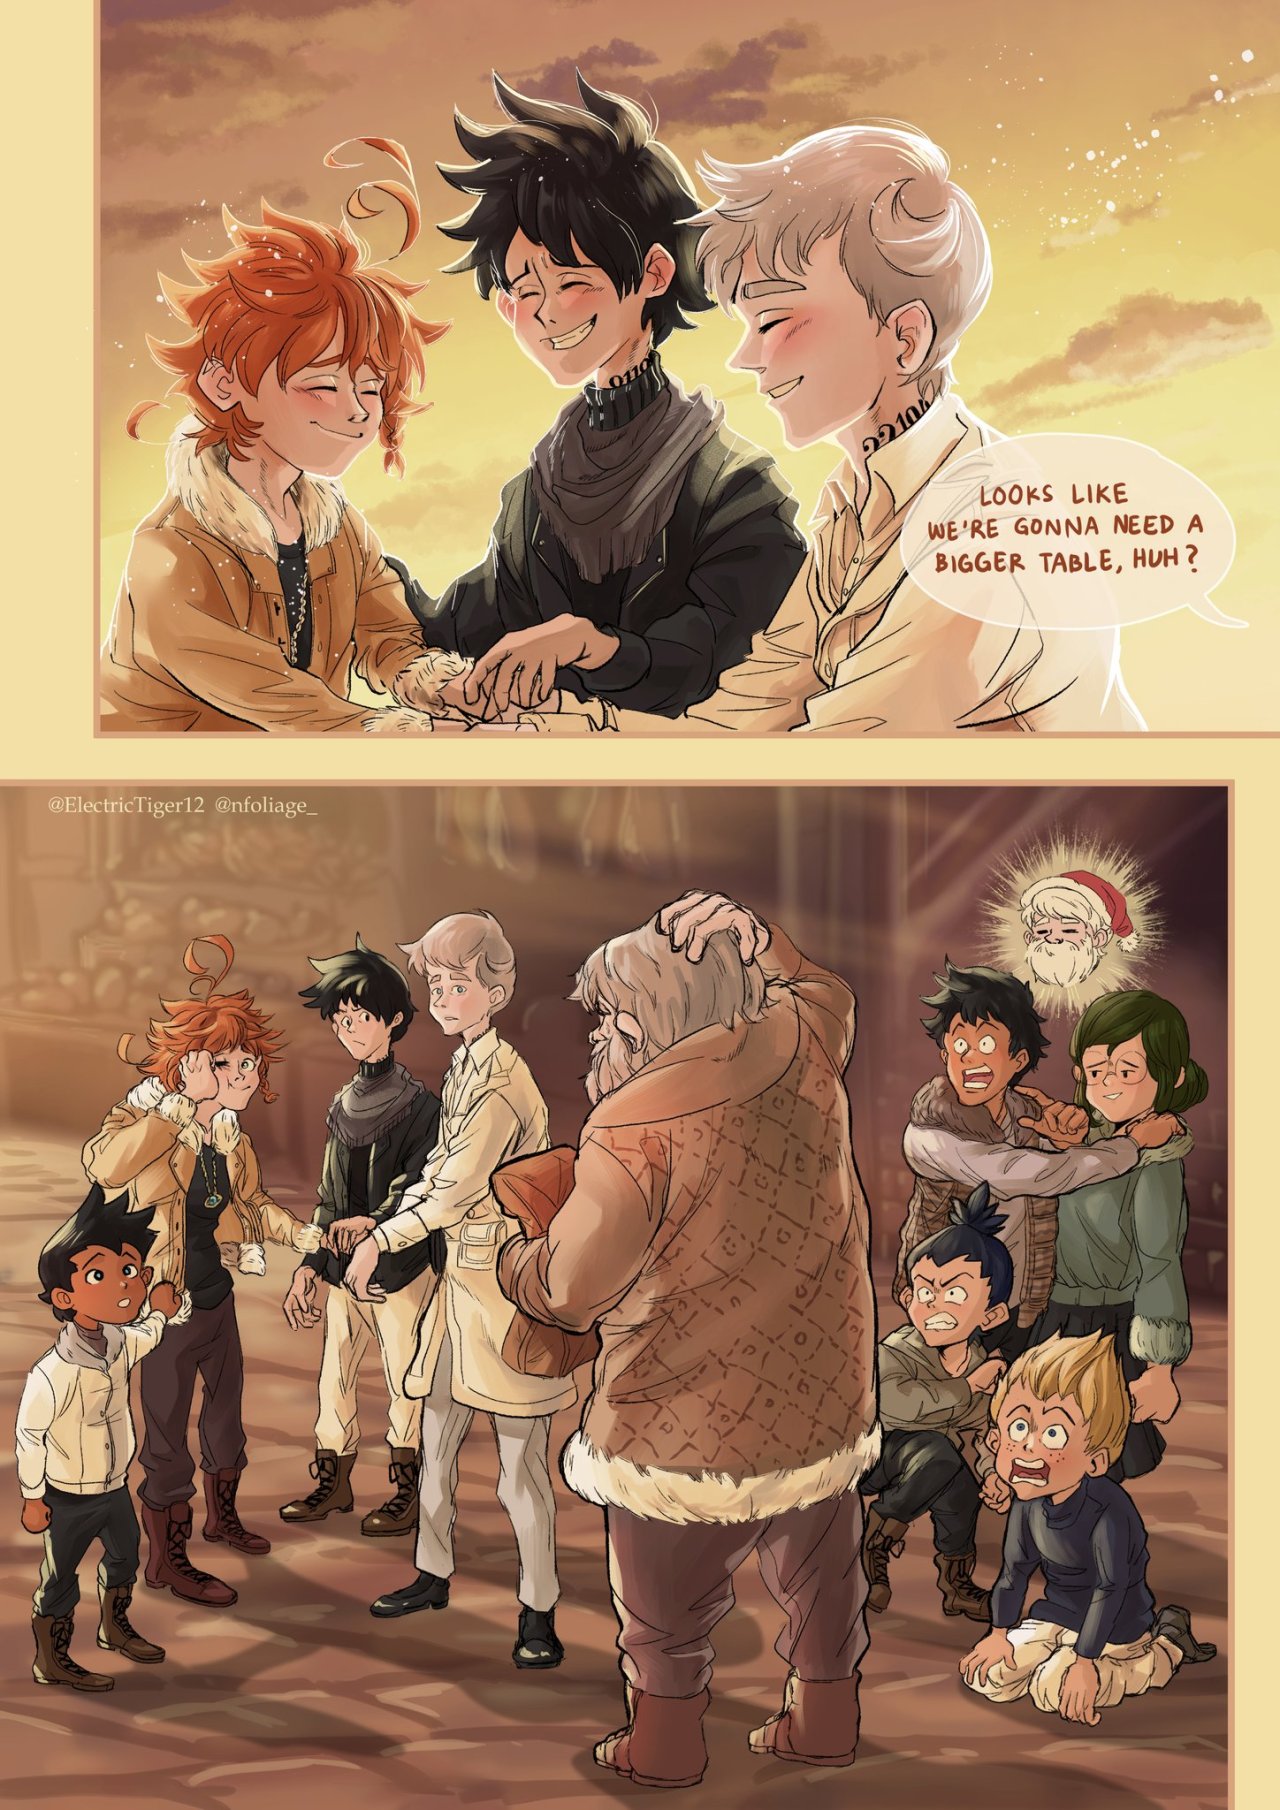 Chapter 181, The Promised Neverland Wiki, Fandom